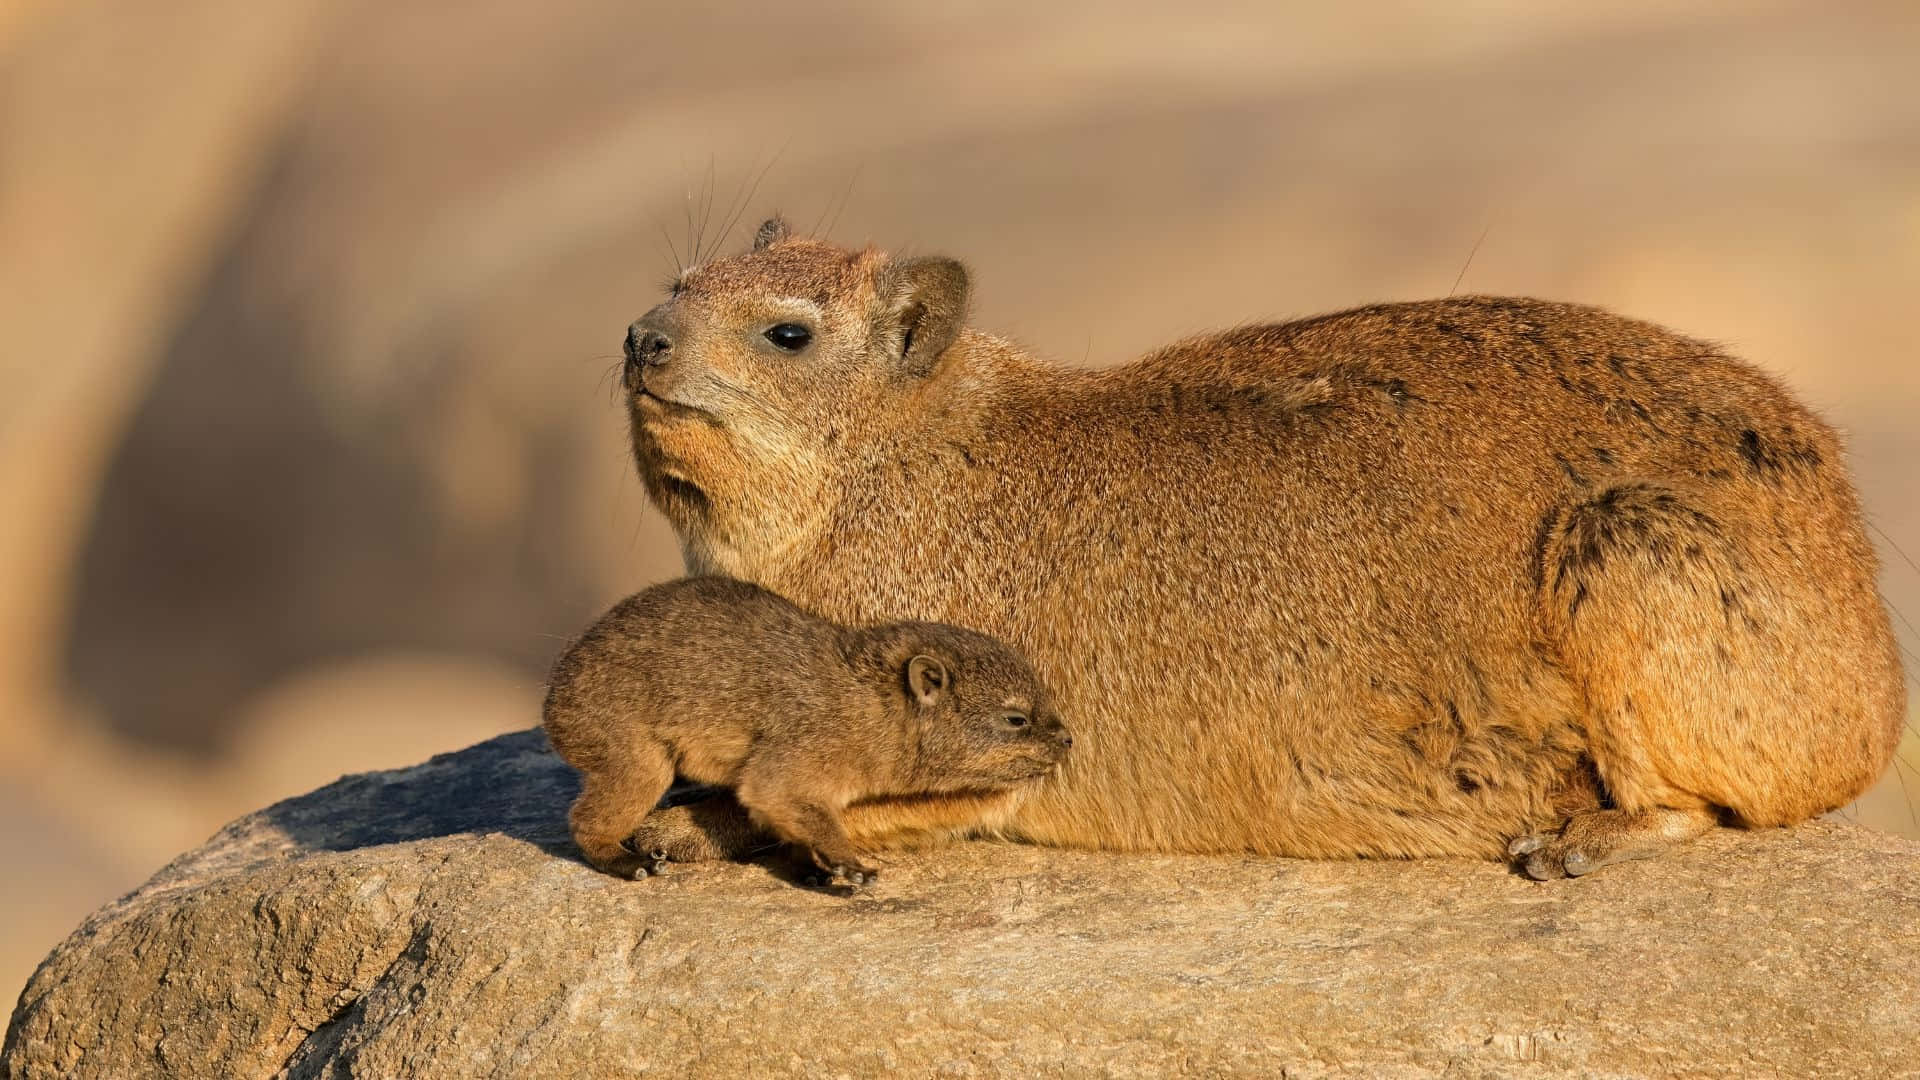 Rock Hyrax Adultand Youngon Stone Wallpaper